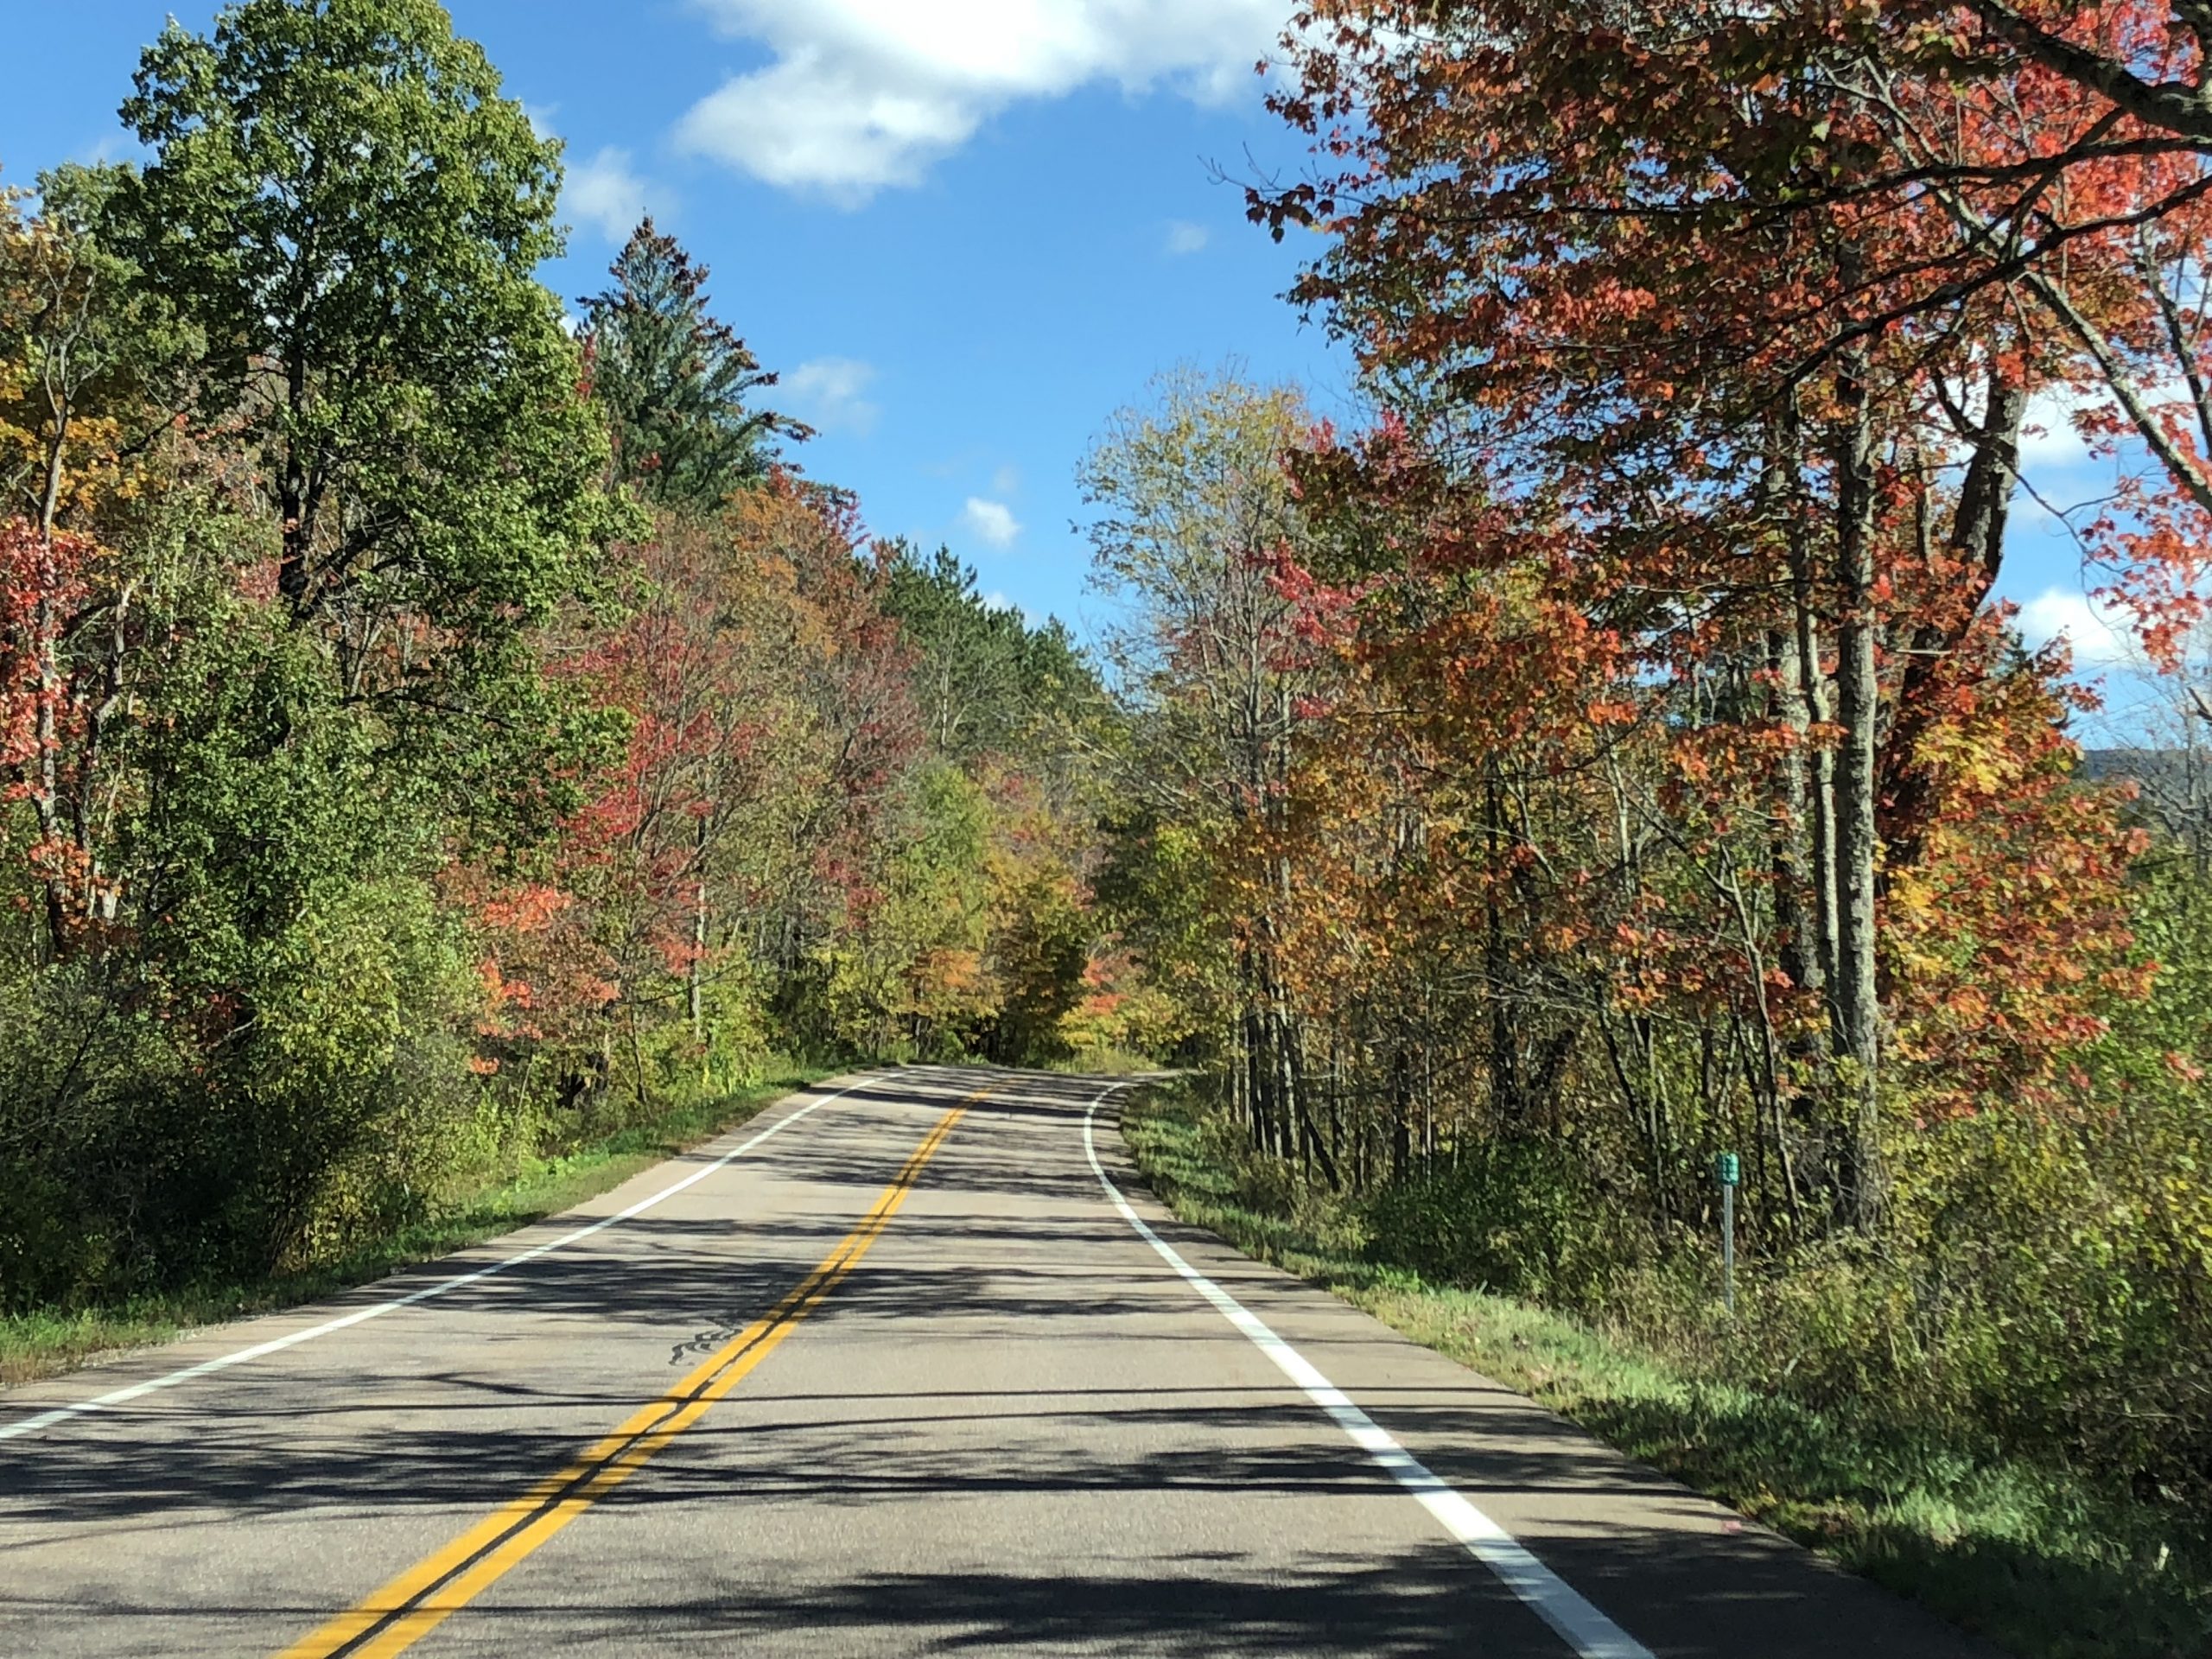 How to spend five fall days in Vermont - leaf peeping in Vermont travel guide - fall foliage trip to Vermont